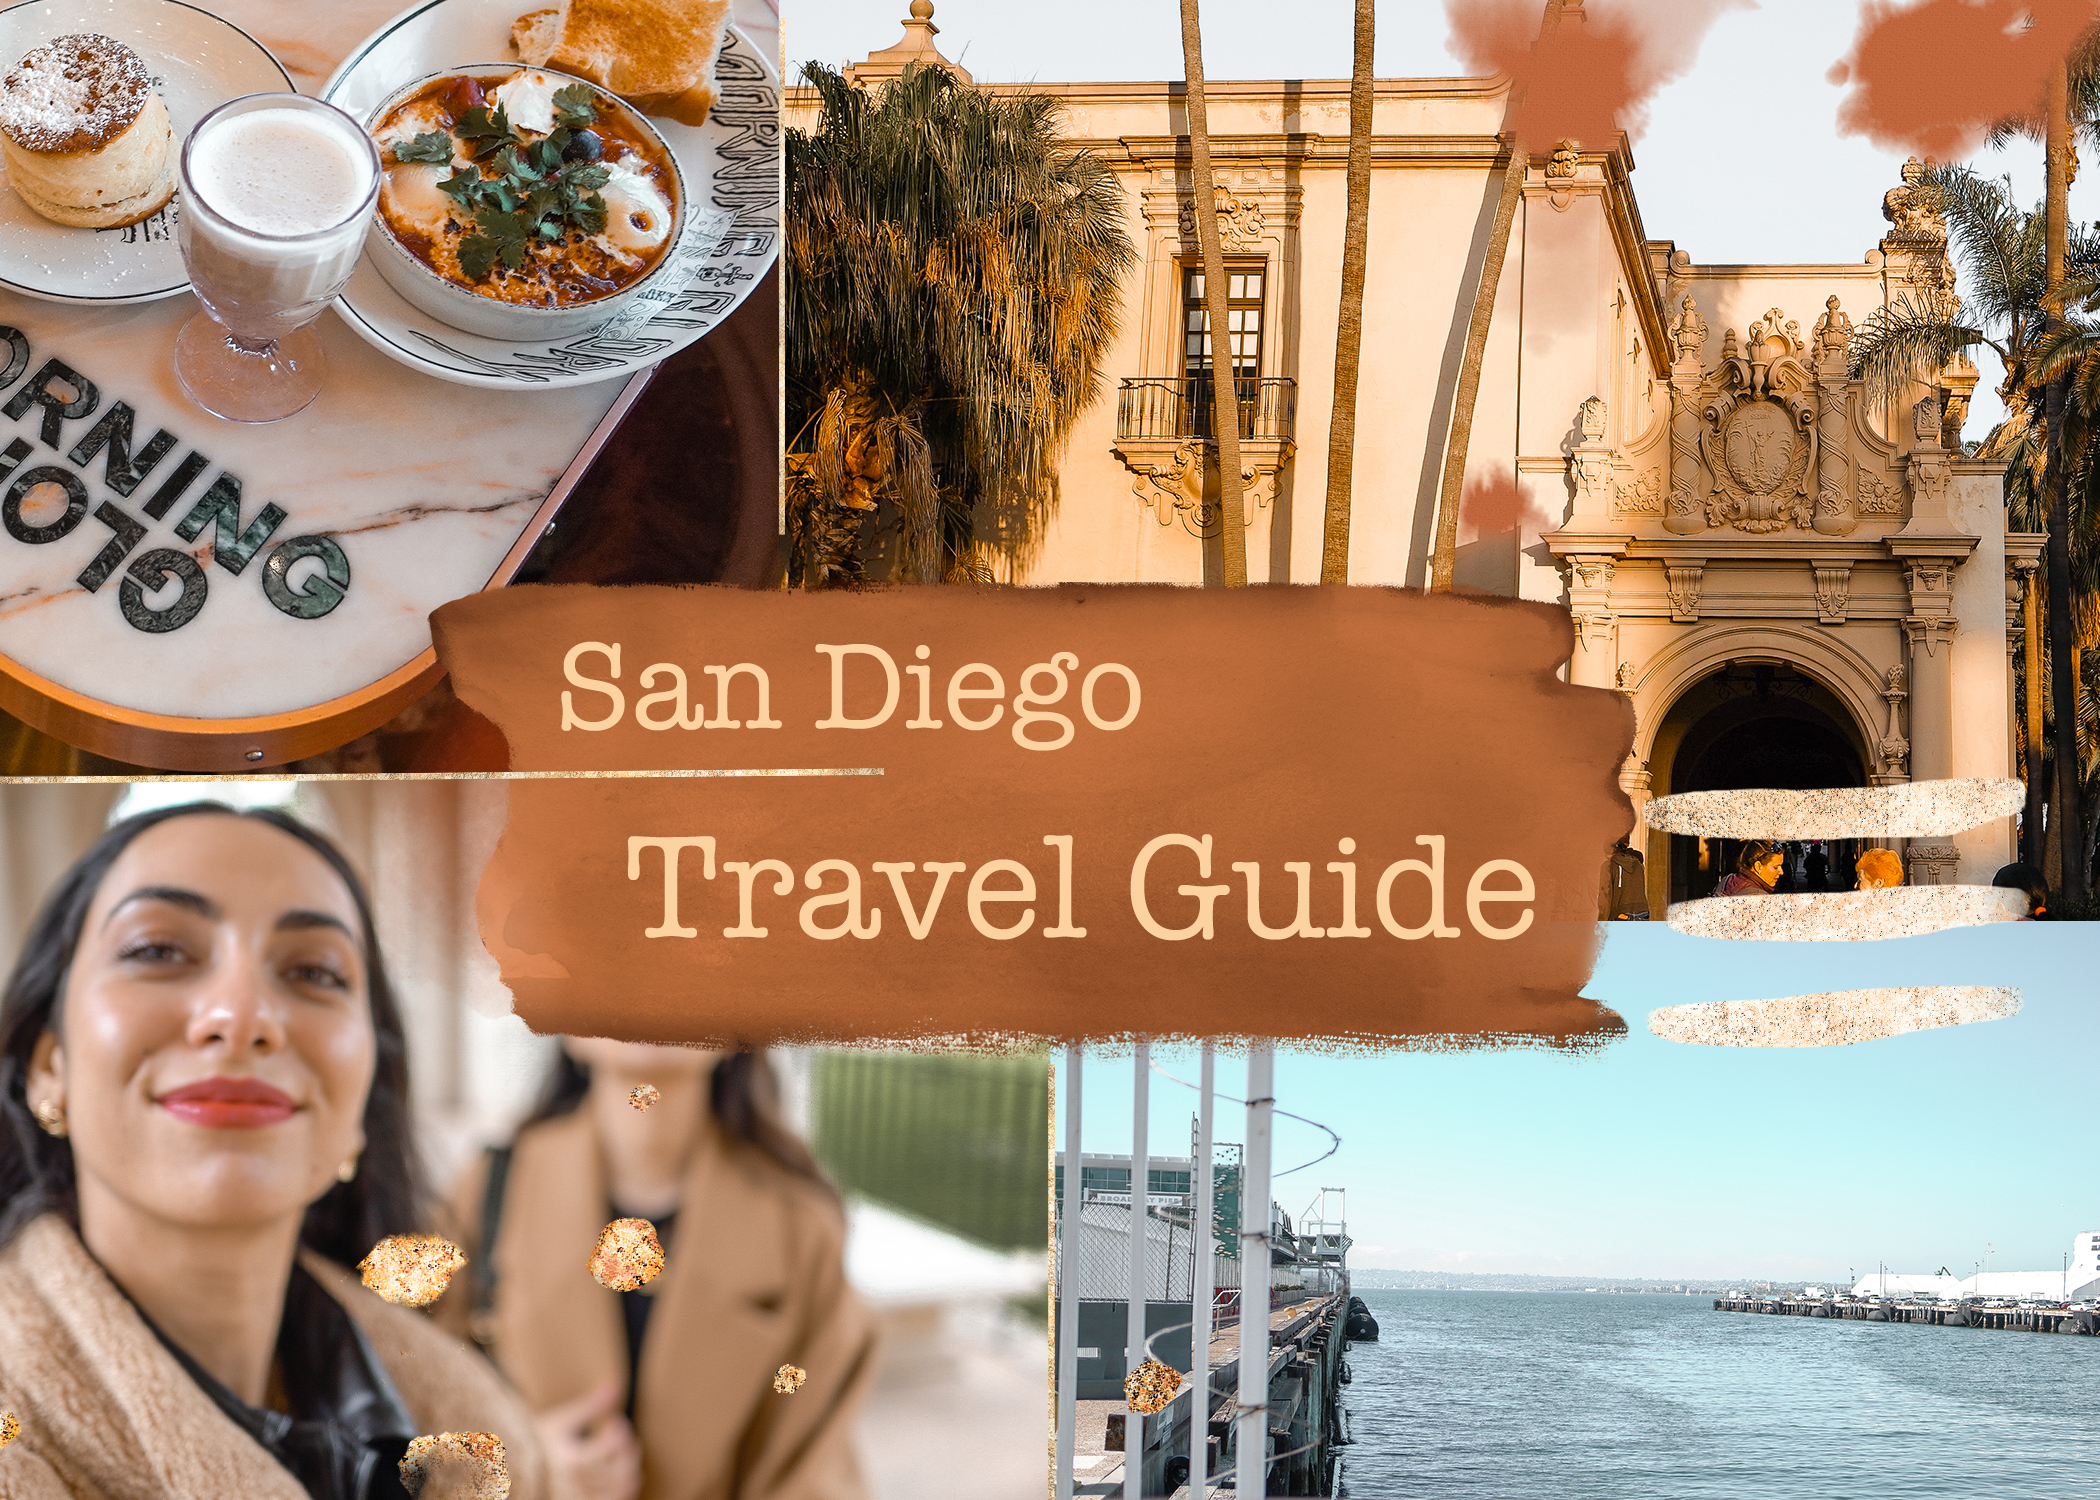 San Diego Travel Guide: Places You Must See!